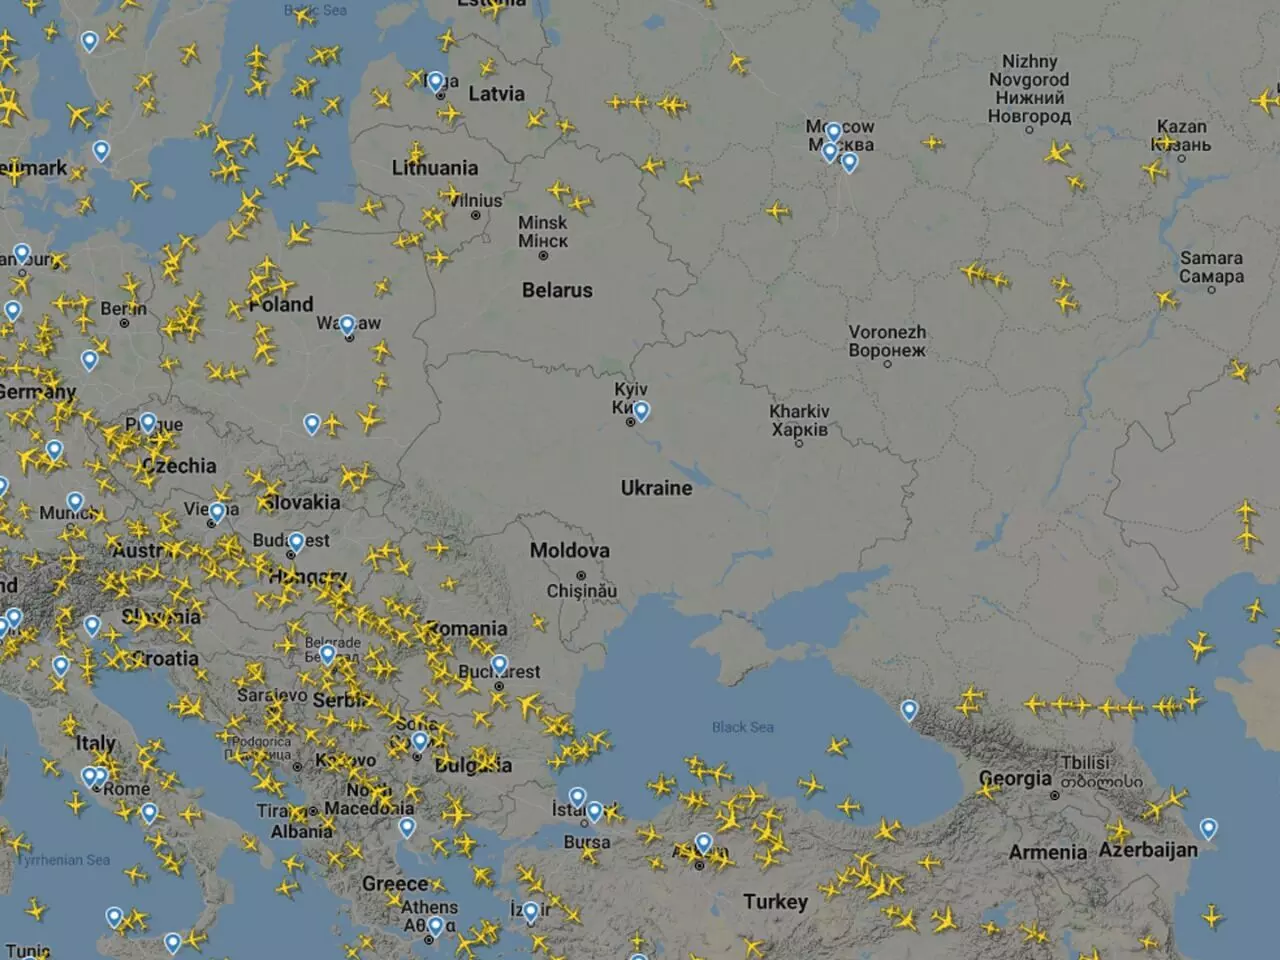 A screen image of Flightradar24 map (1330 hrs CET) that shows real-time commercial aircraft flight tracking information